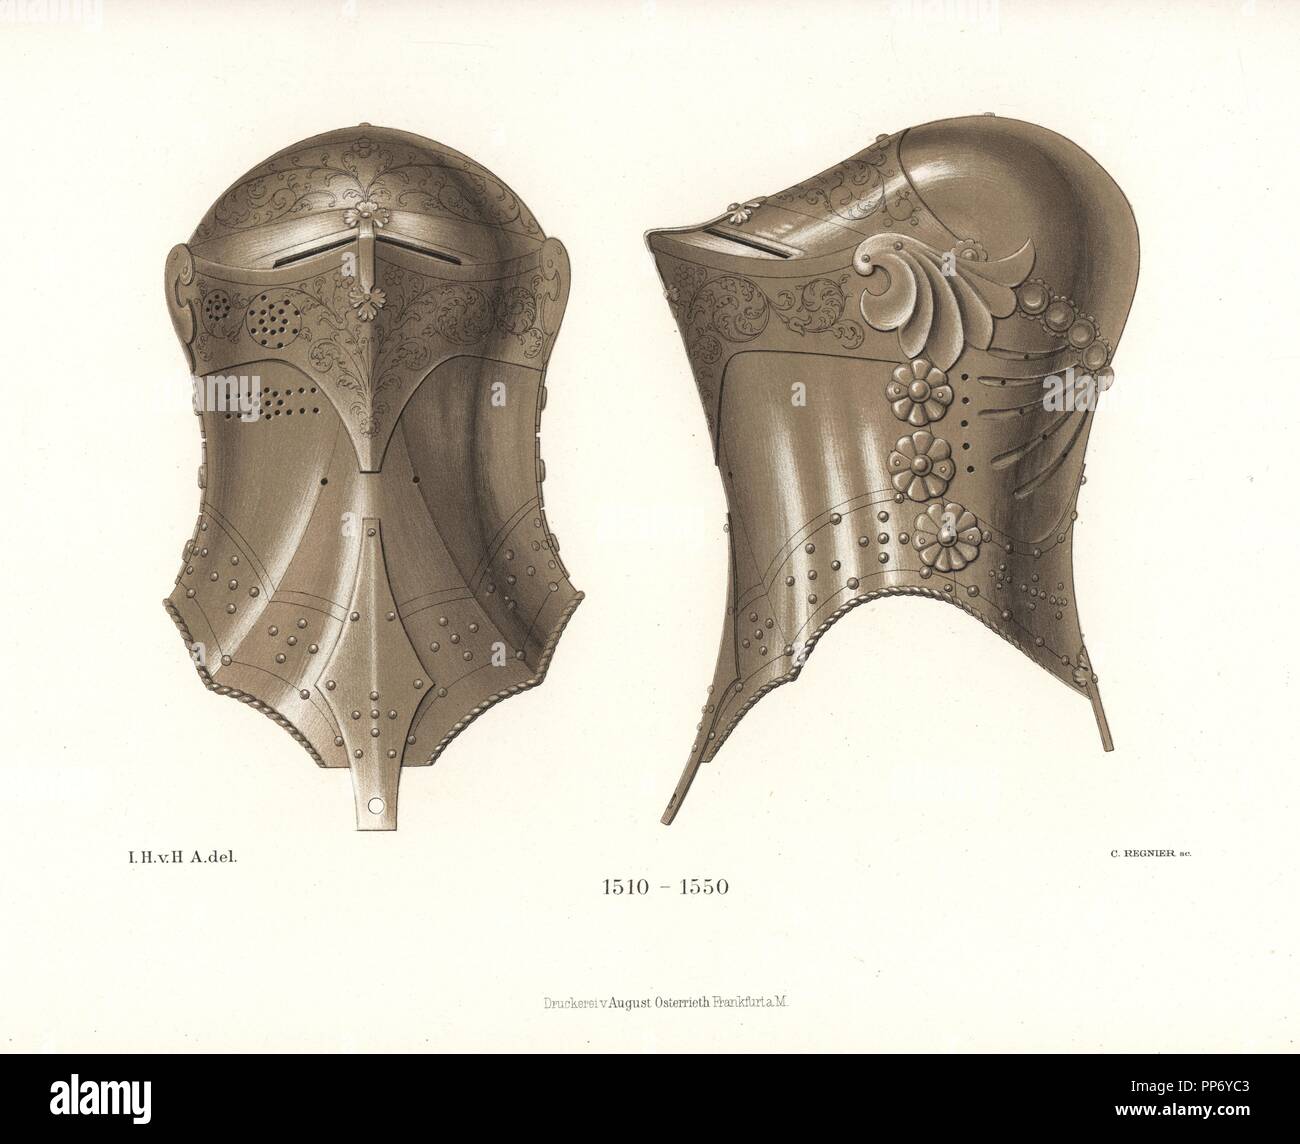 German frogmouth helm, first half of 16th century. Used in the Stechen joust, this round-headed helmet was bolted onto the cuirass. Chromolithograph from Hefner-Alteneck's 'Costumes, Artworks and Appliances from the Middle Ages to the 17th Century,' Frankfurt, 1889. Illustration by Dr. Jakob Heinrich von Hefner-Alteneck, lithographed by C. Regnier. Dr. Hefner-Alteneck (1811-1903) was a German museum curator, archaeologist, art historian, illustrator and etcher. Stock Photo